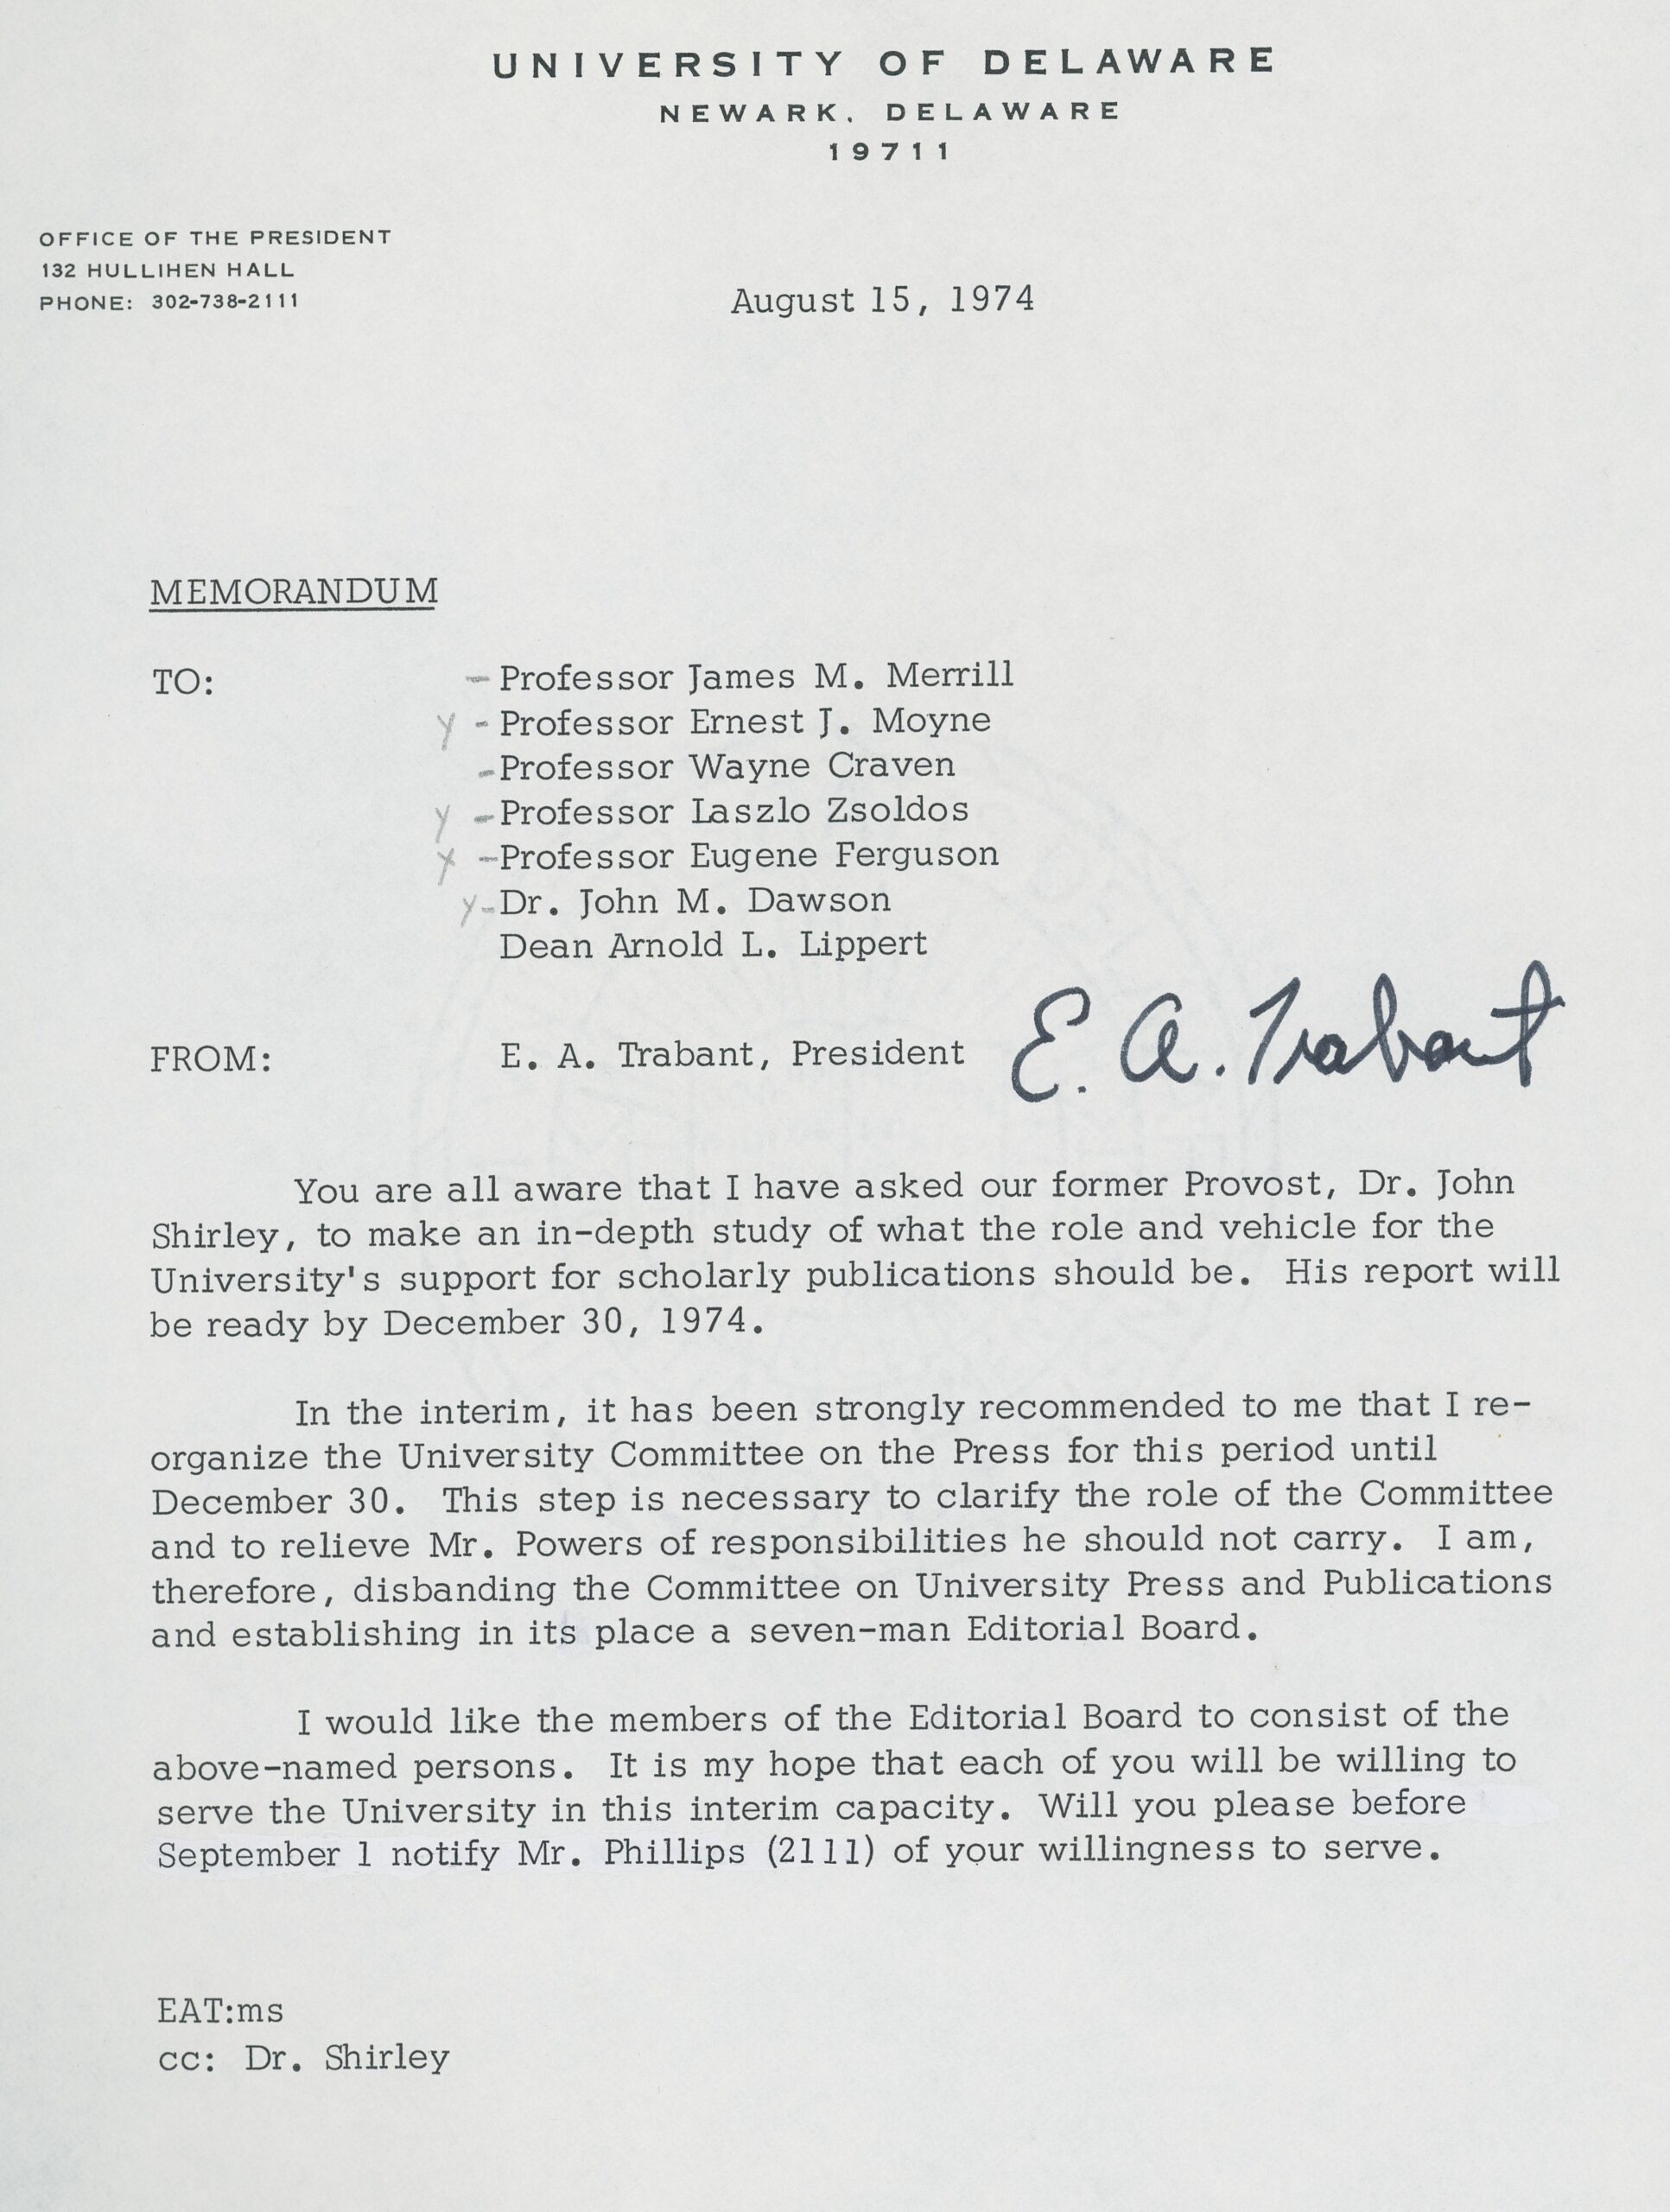 Letter from E. A. Trabant August 15, 1974